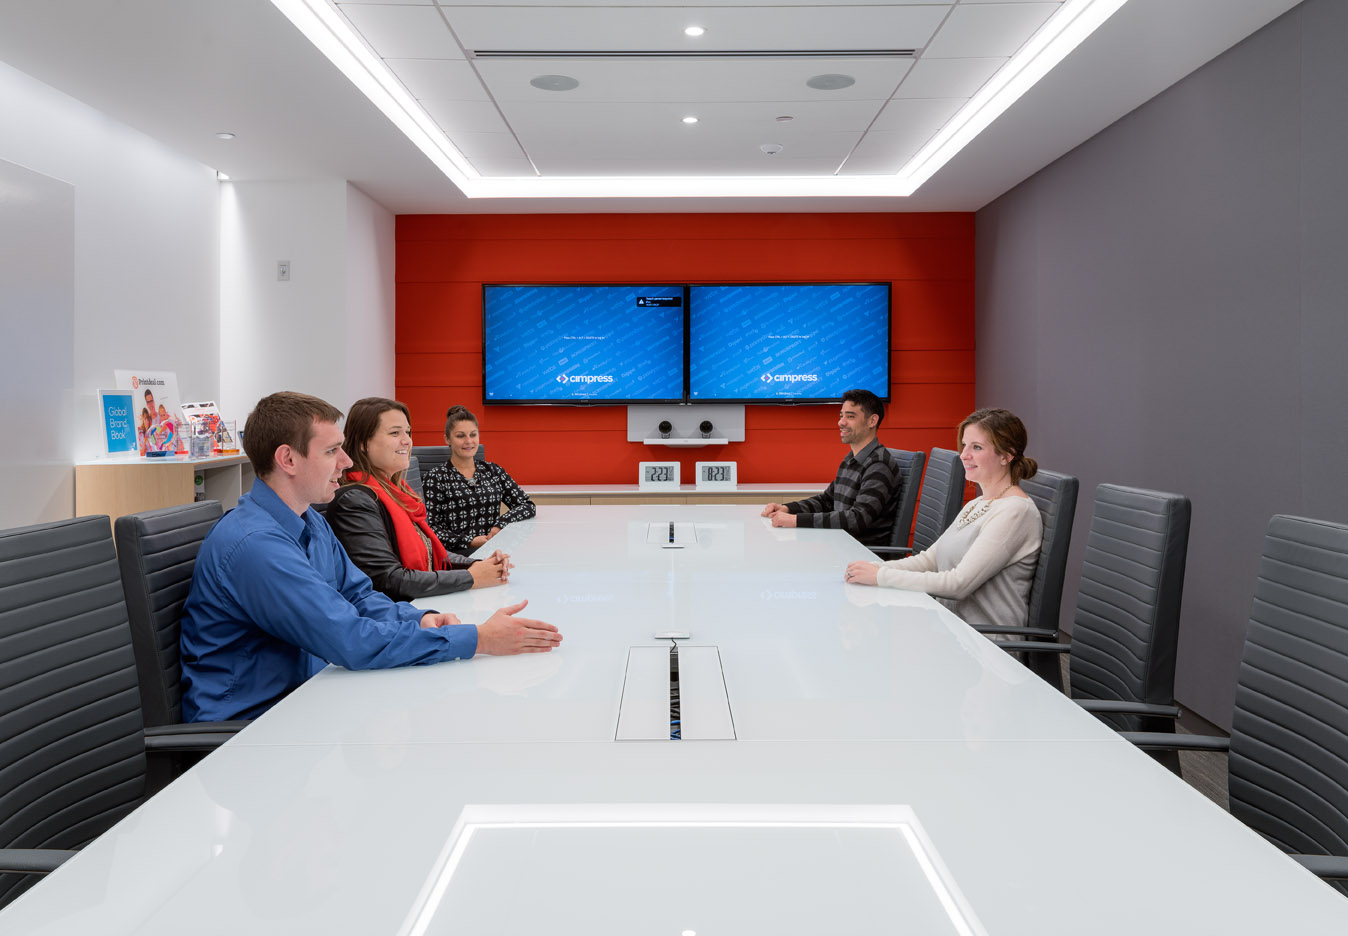 Vistaprint Cimpress Conference Room, 5 employees discuss